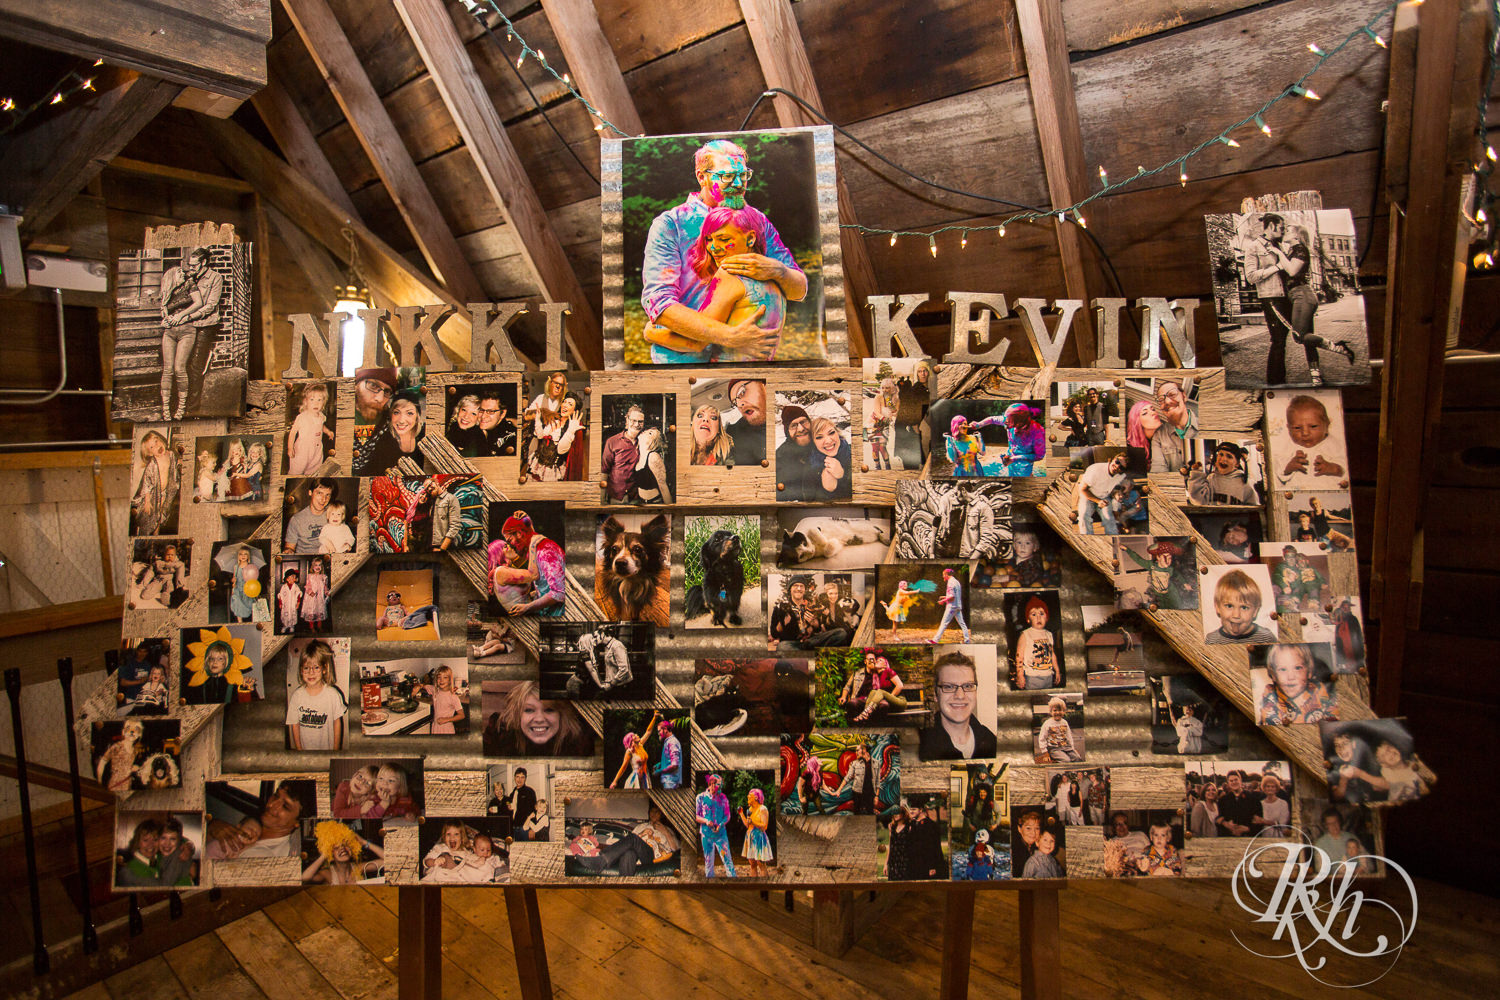 Collage of wedding and engagement photography in a barn space.